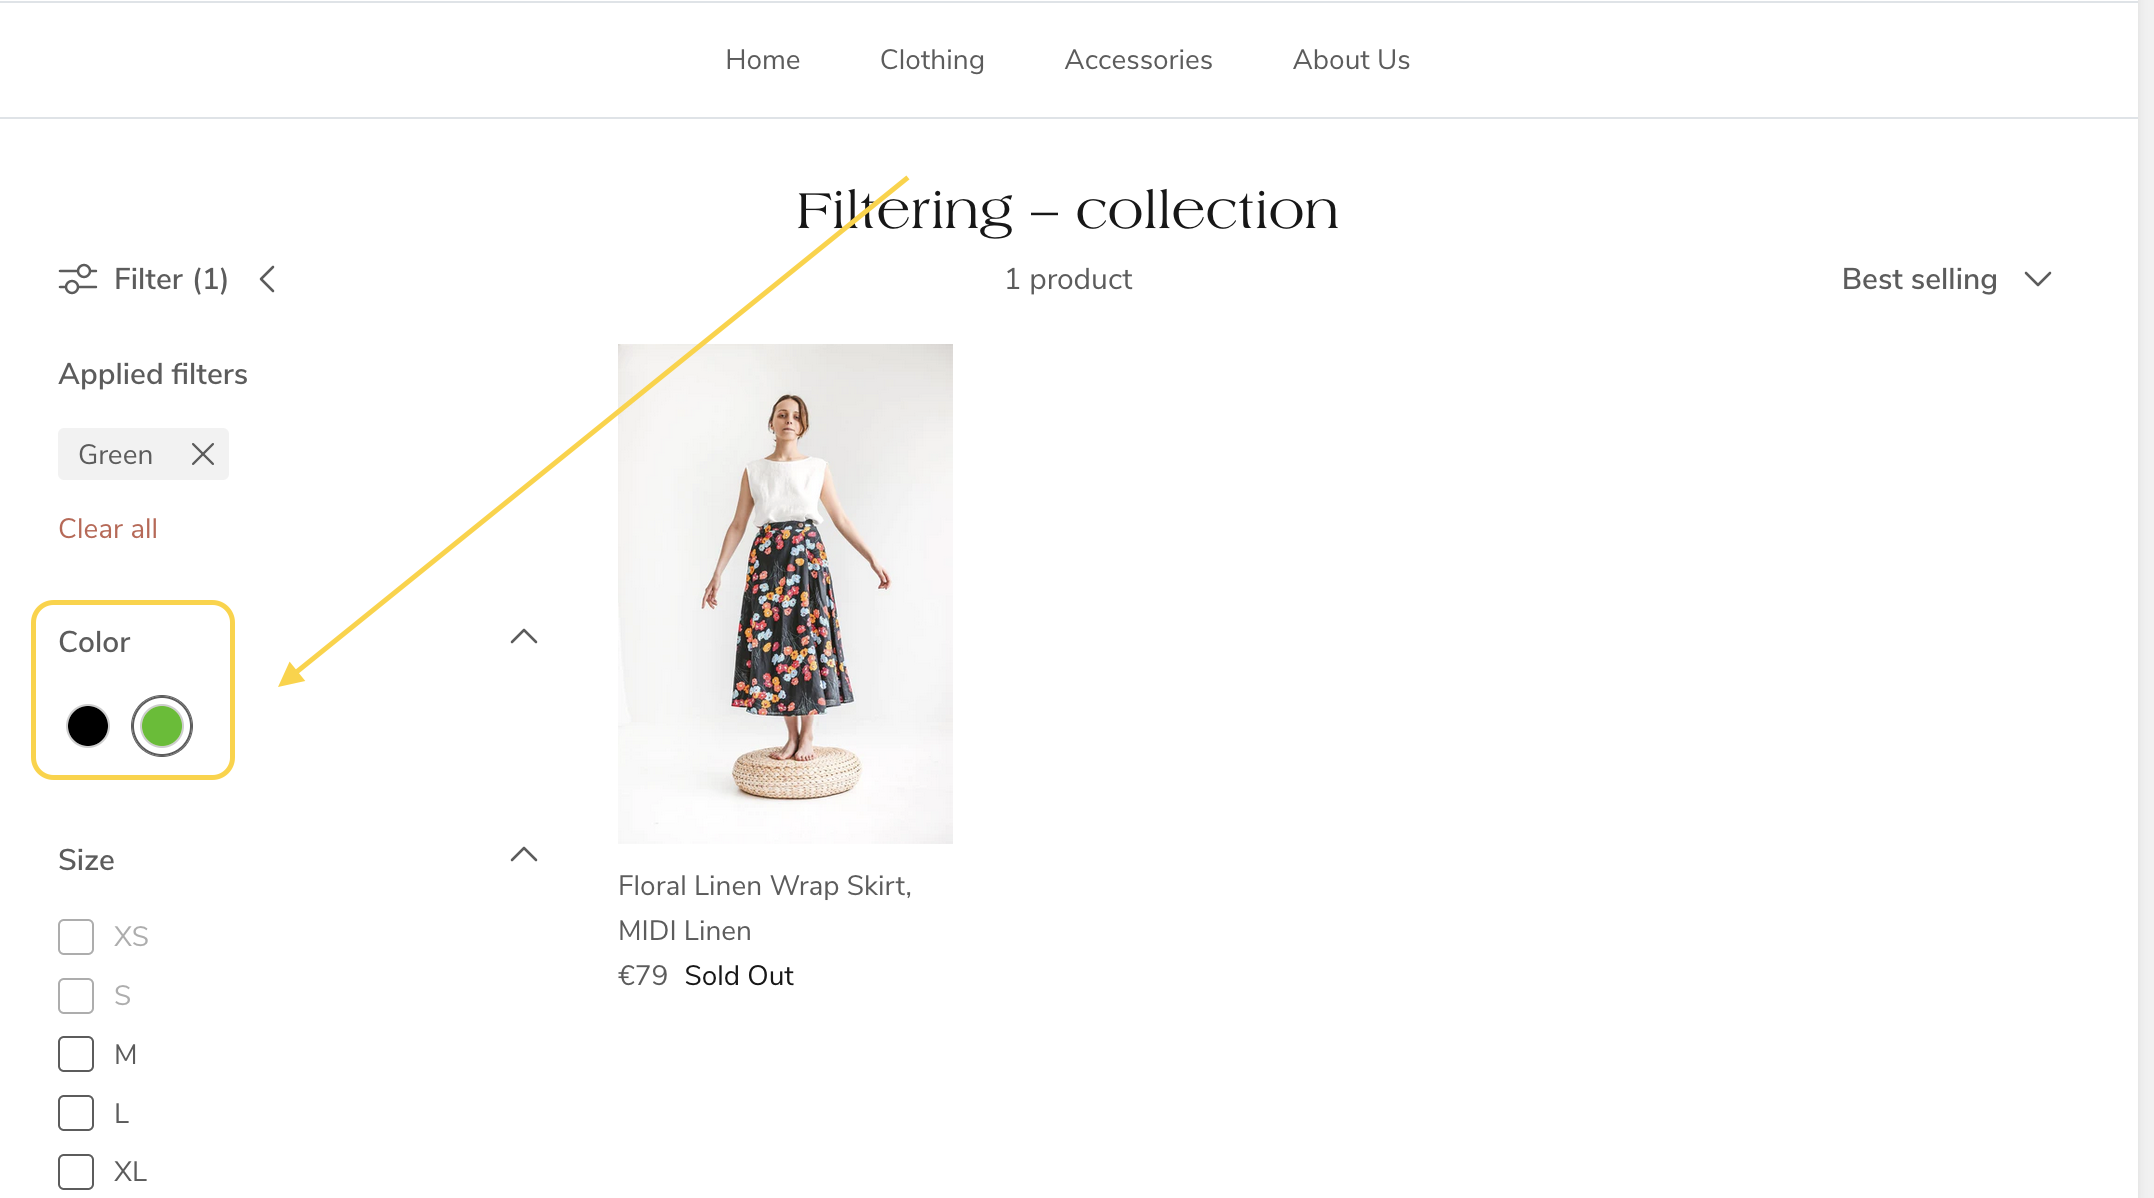 Using visual filters on collection pages